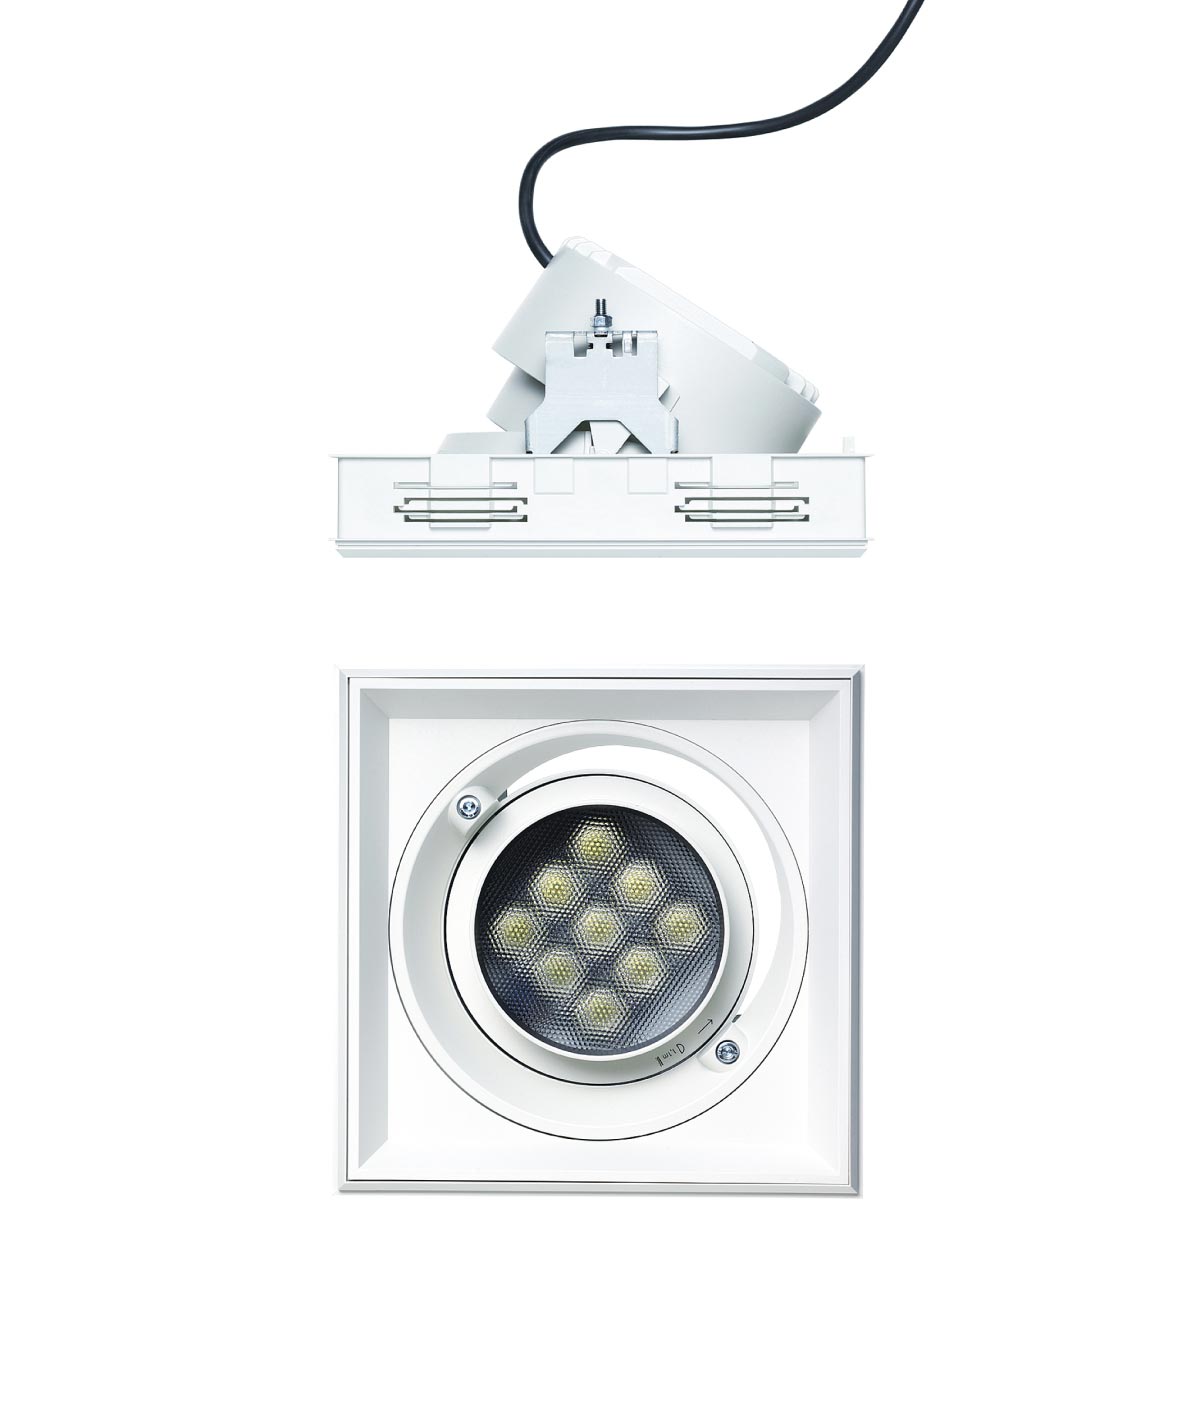 Quintessence Square Recessed Adjustable Spotlight With Regressed Mounting Tray Spot Beam 6W LED 4000K DALI White Trim F/P